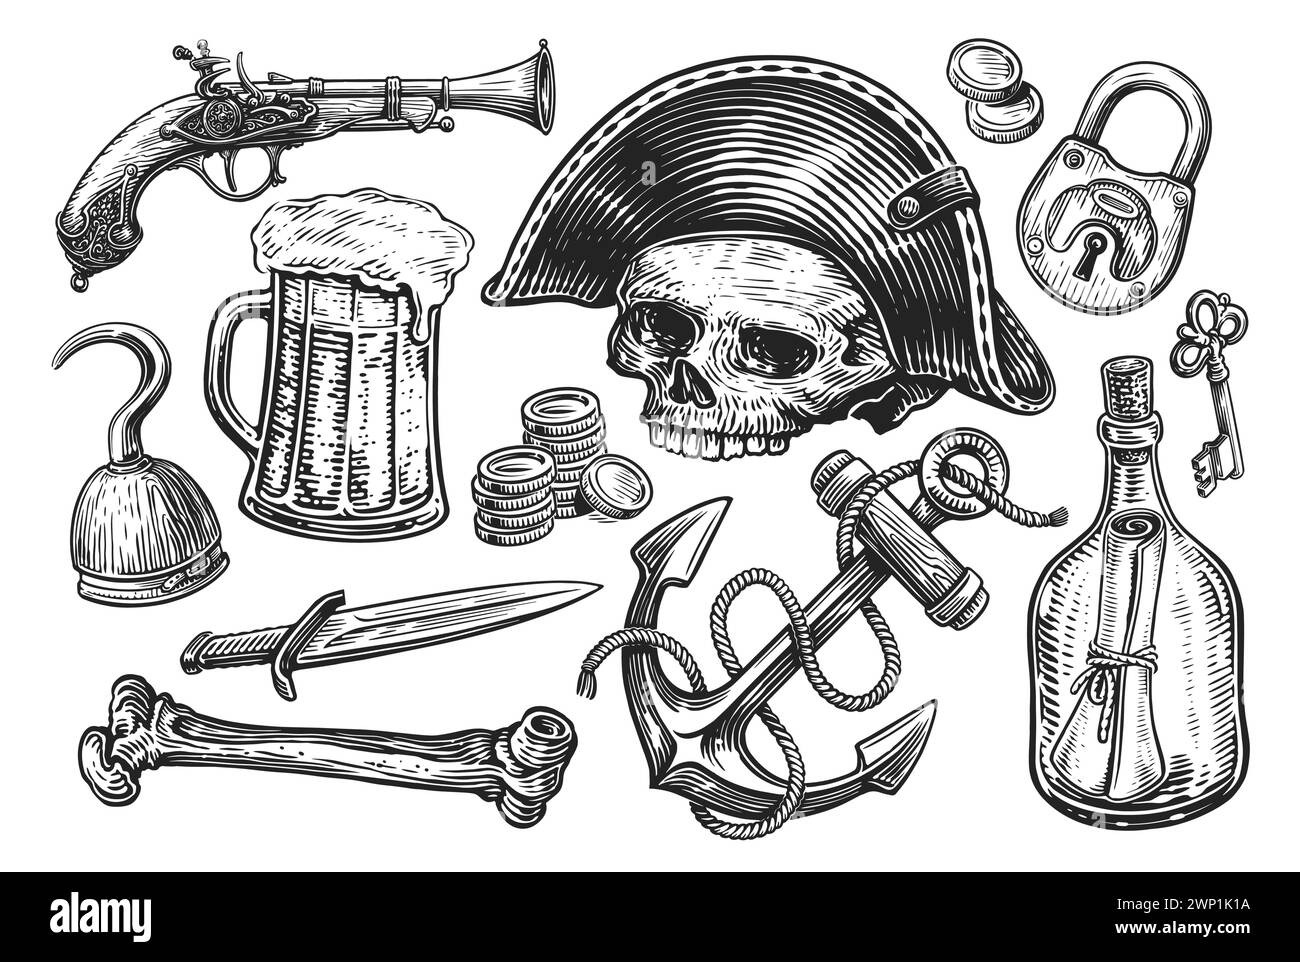 Pirate concept. Hand drawn objects engraving style. Sketch illustration Stock Vector